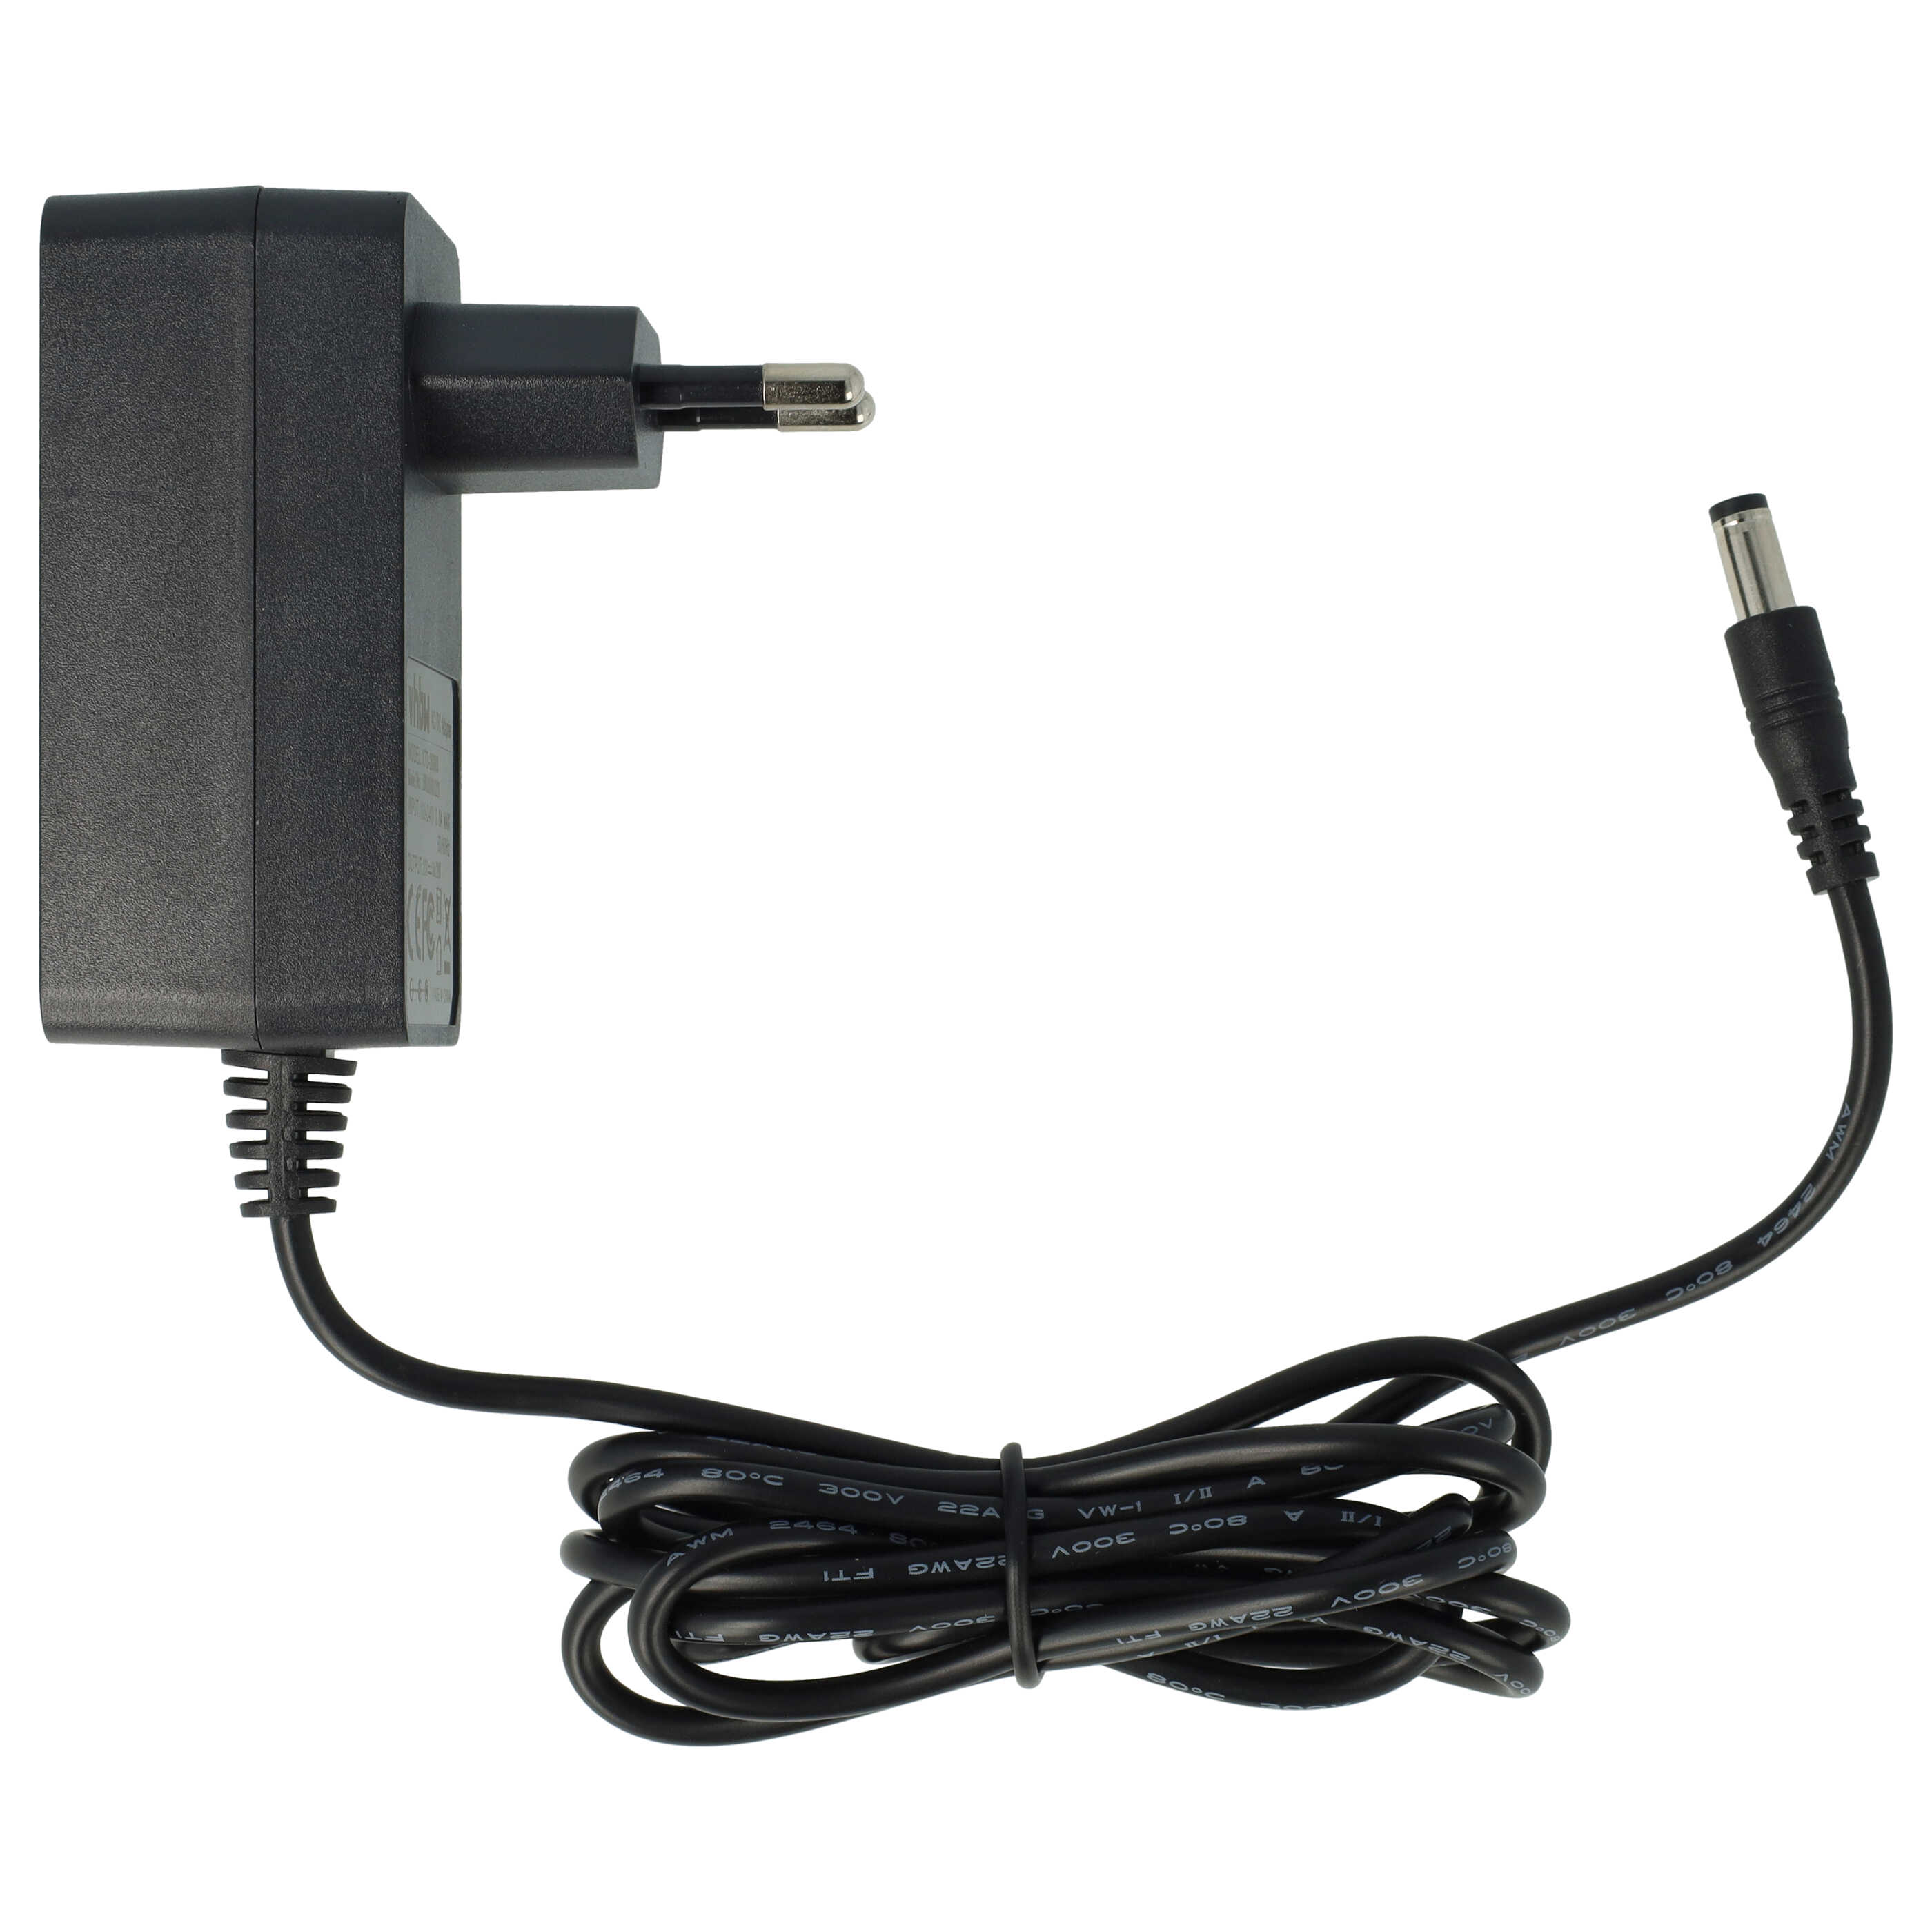 Mains Power Adapter suitable for Ecovacs Deebot D83 Robot Vacuum Cleaner Charging Station - 170 cm long Cable